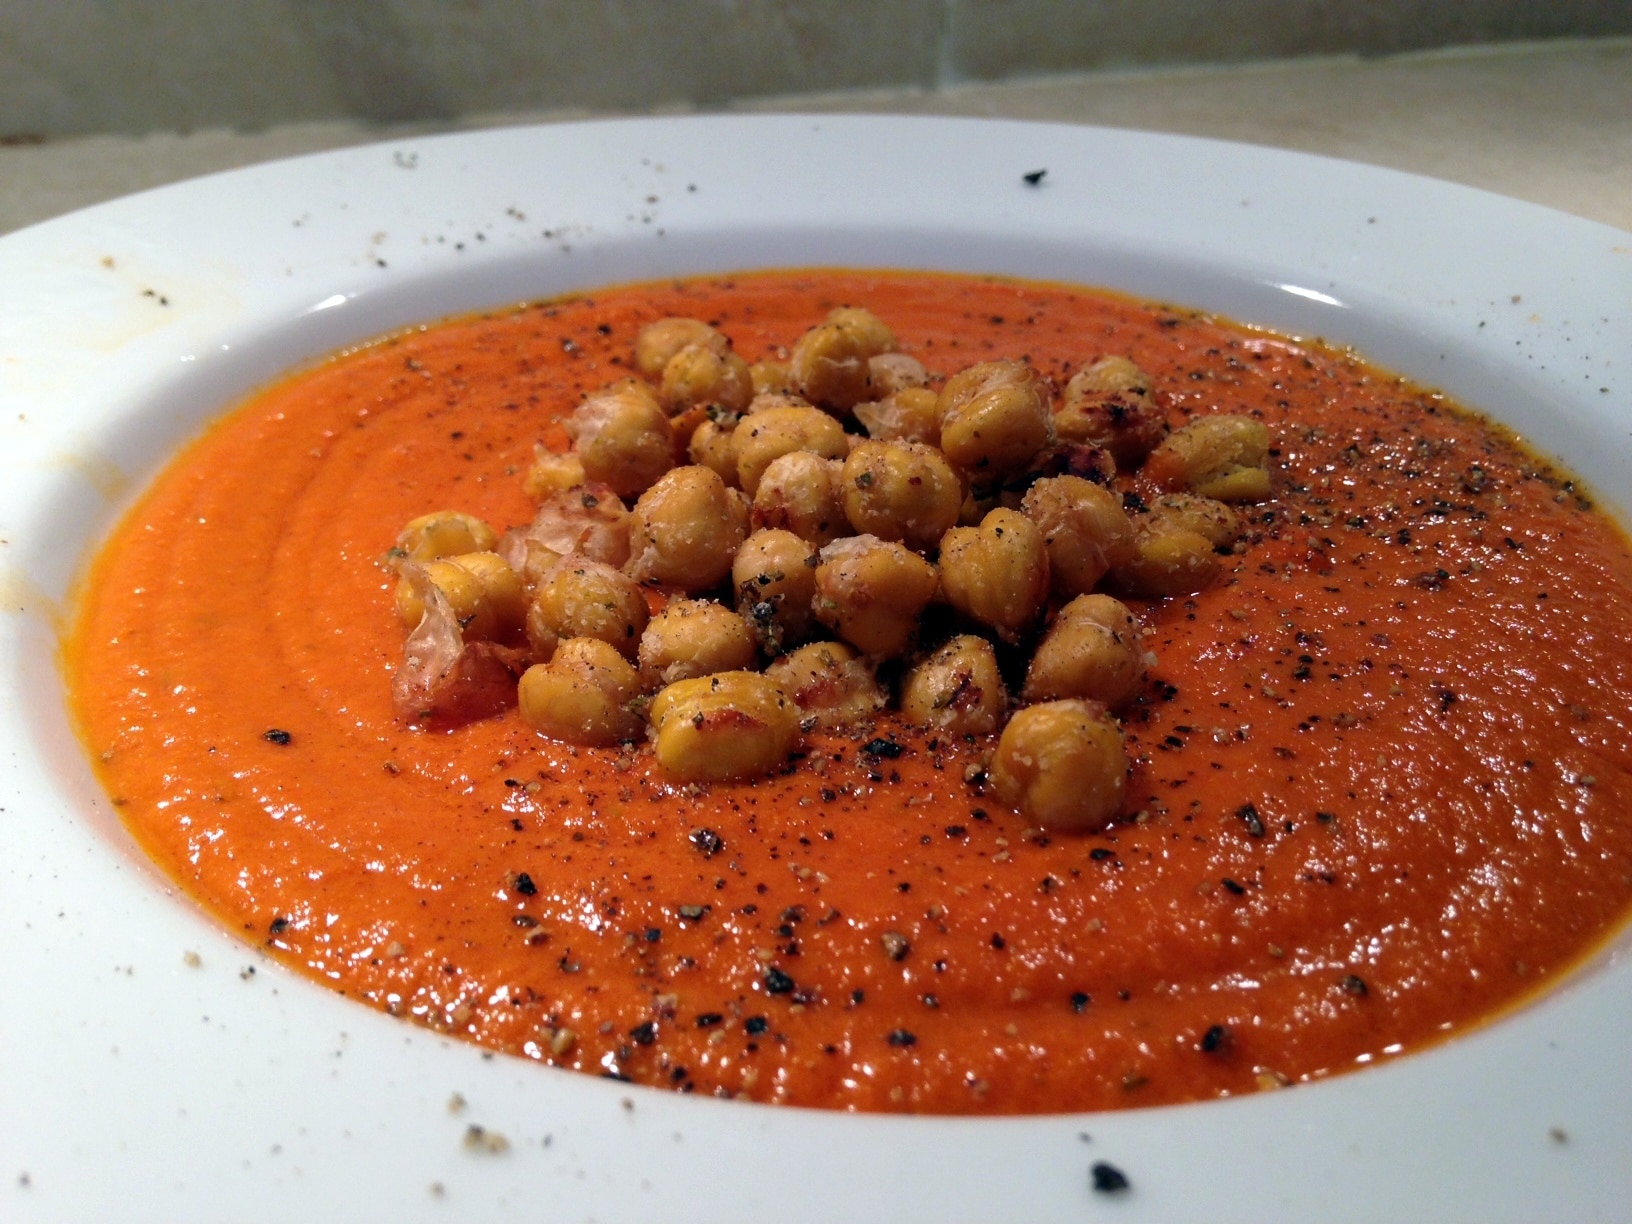 Large white bowl of Creamy Tomato Soup with Roasted Chickpeas